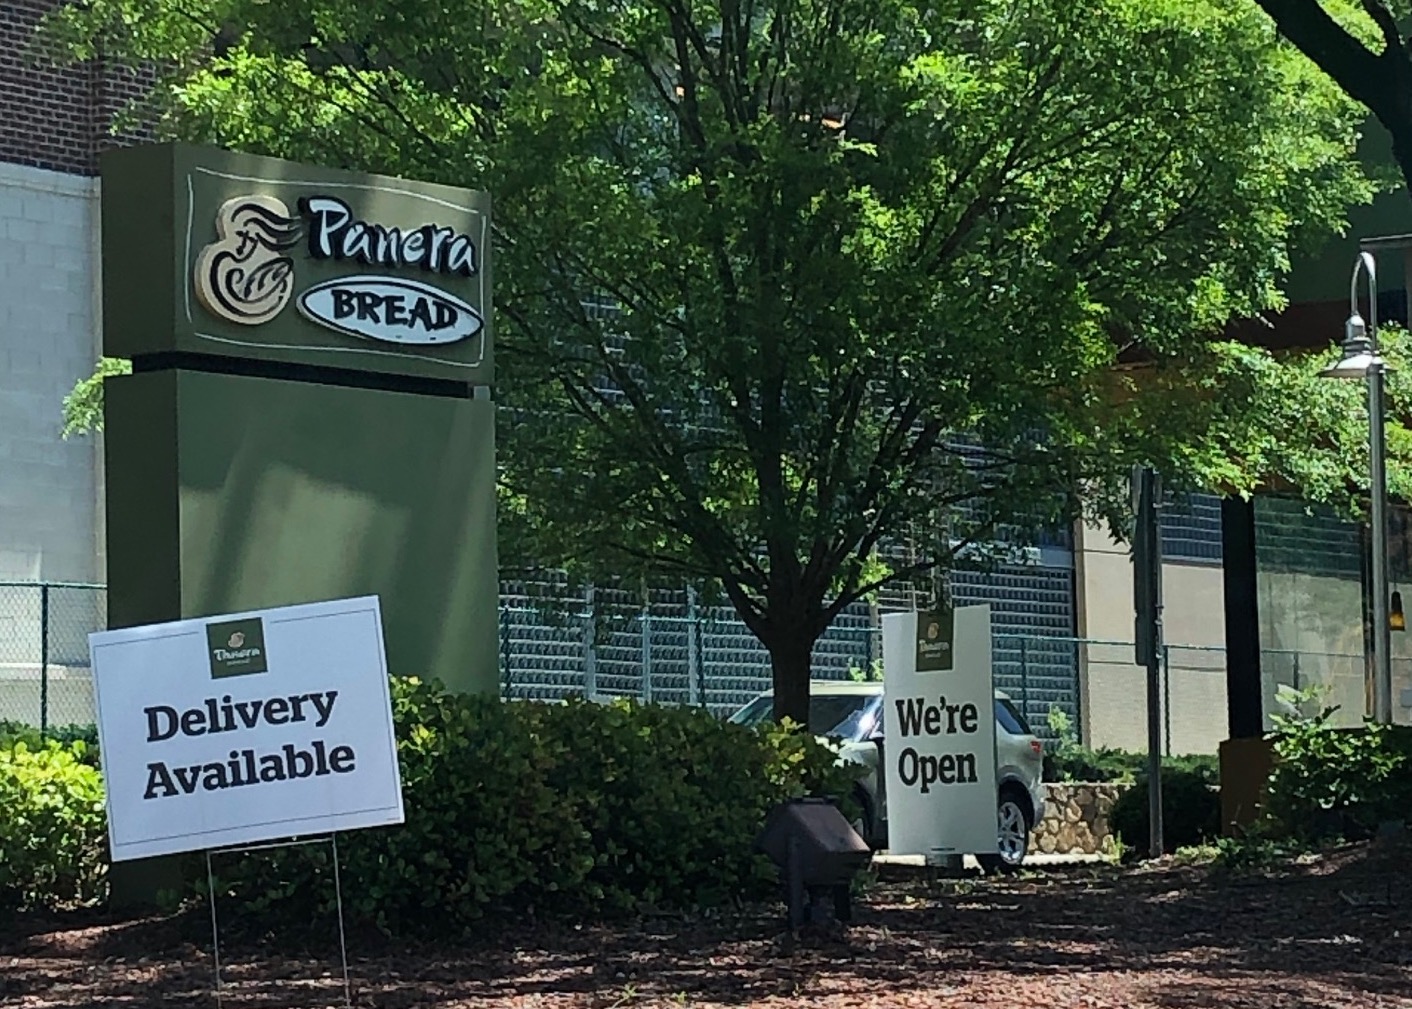 Panera Bread Restaurant with sign for Delivery Available